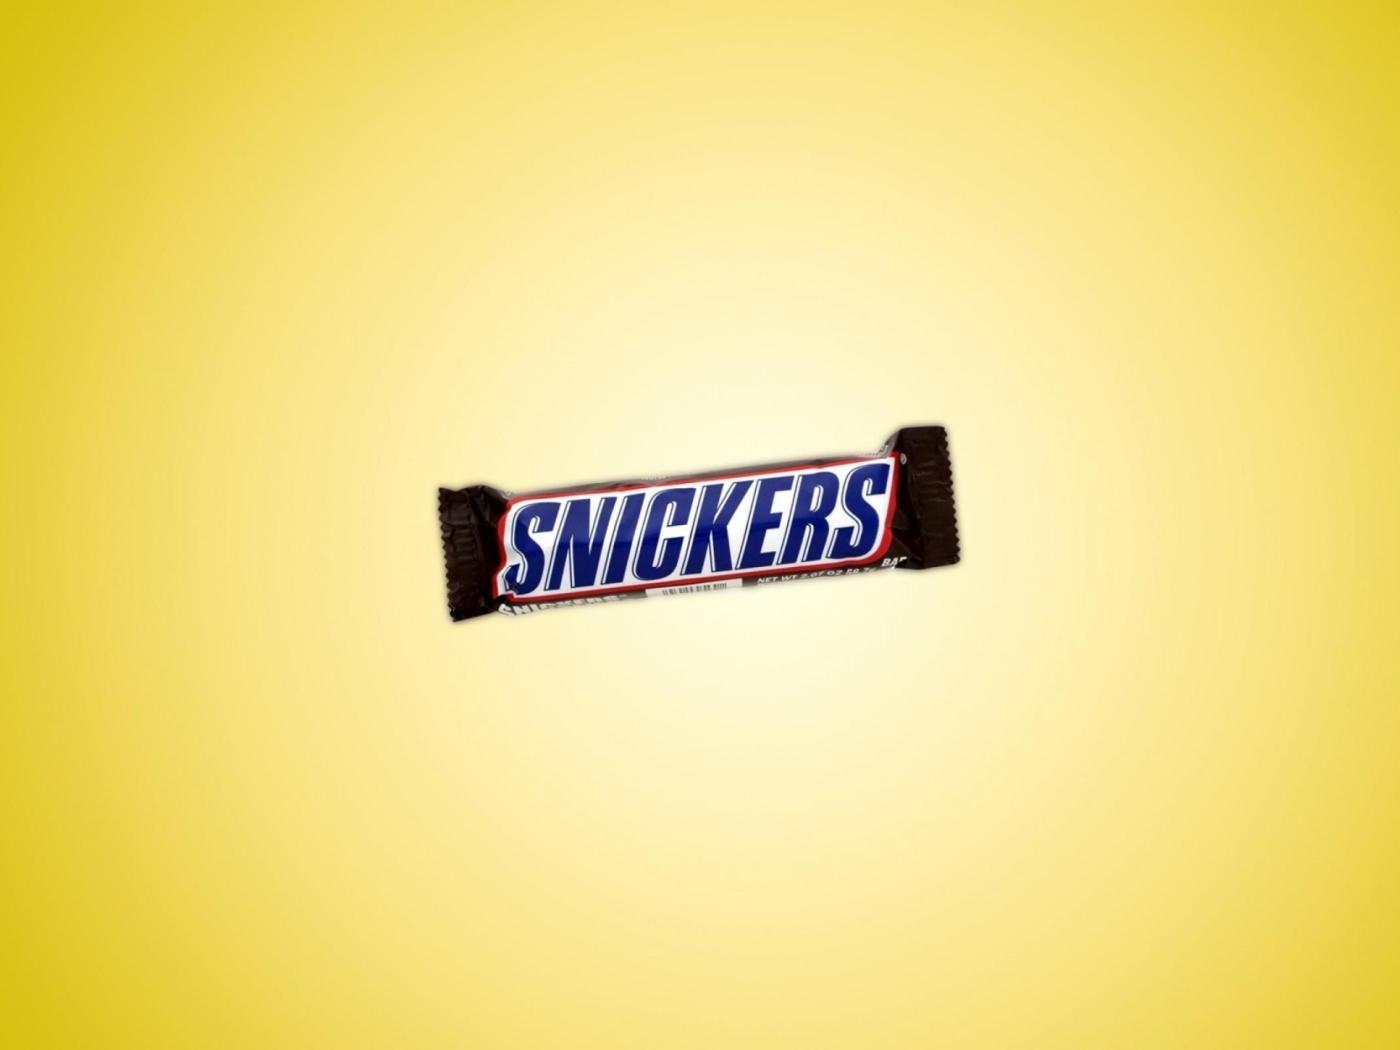 Snickers Chocolate wallpaper 1400x1050